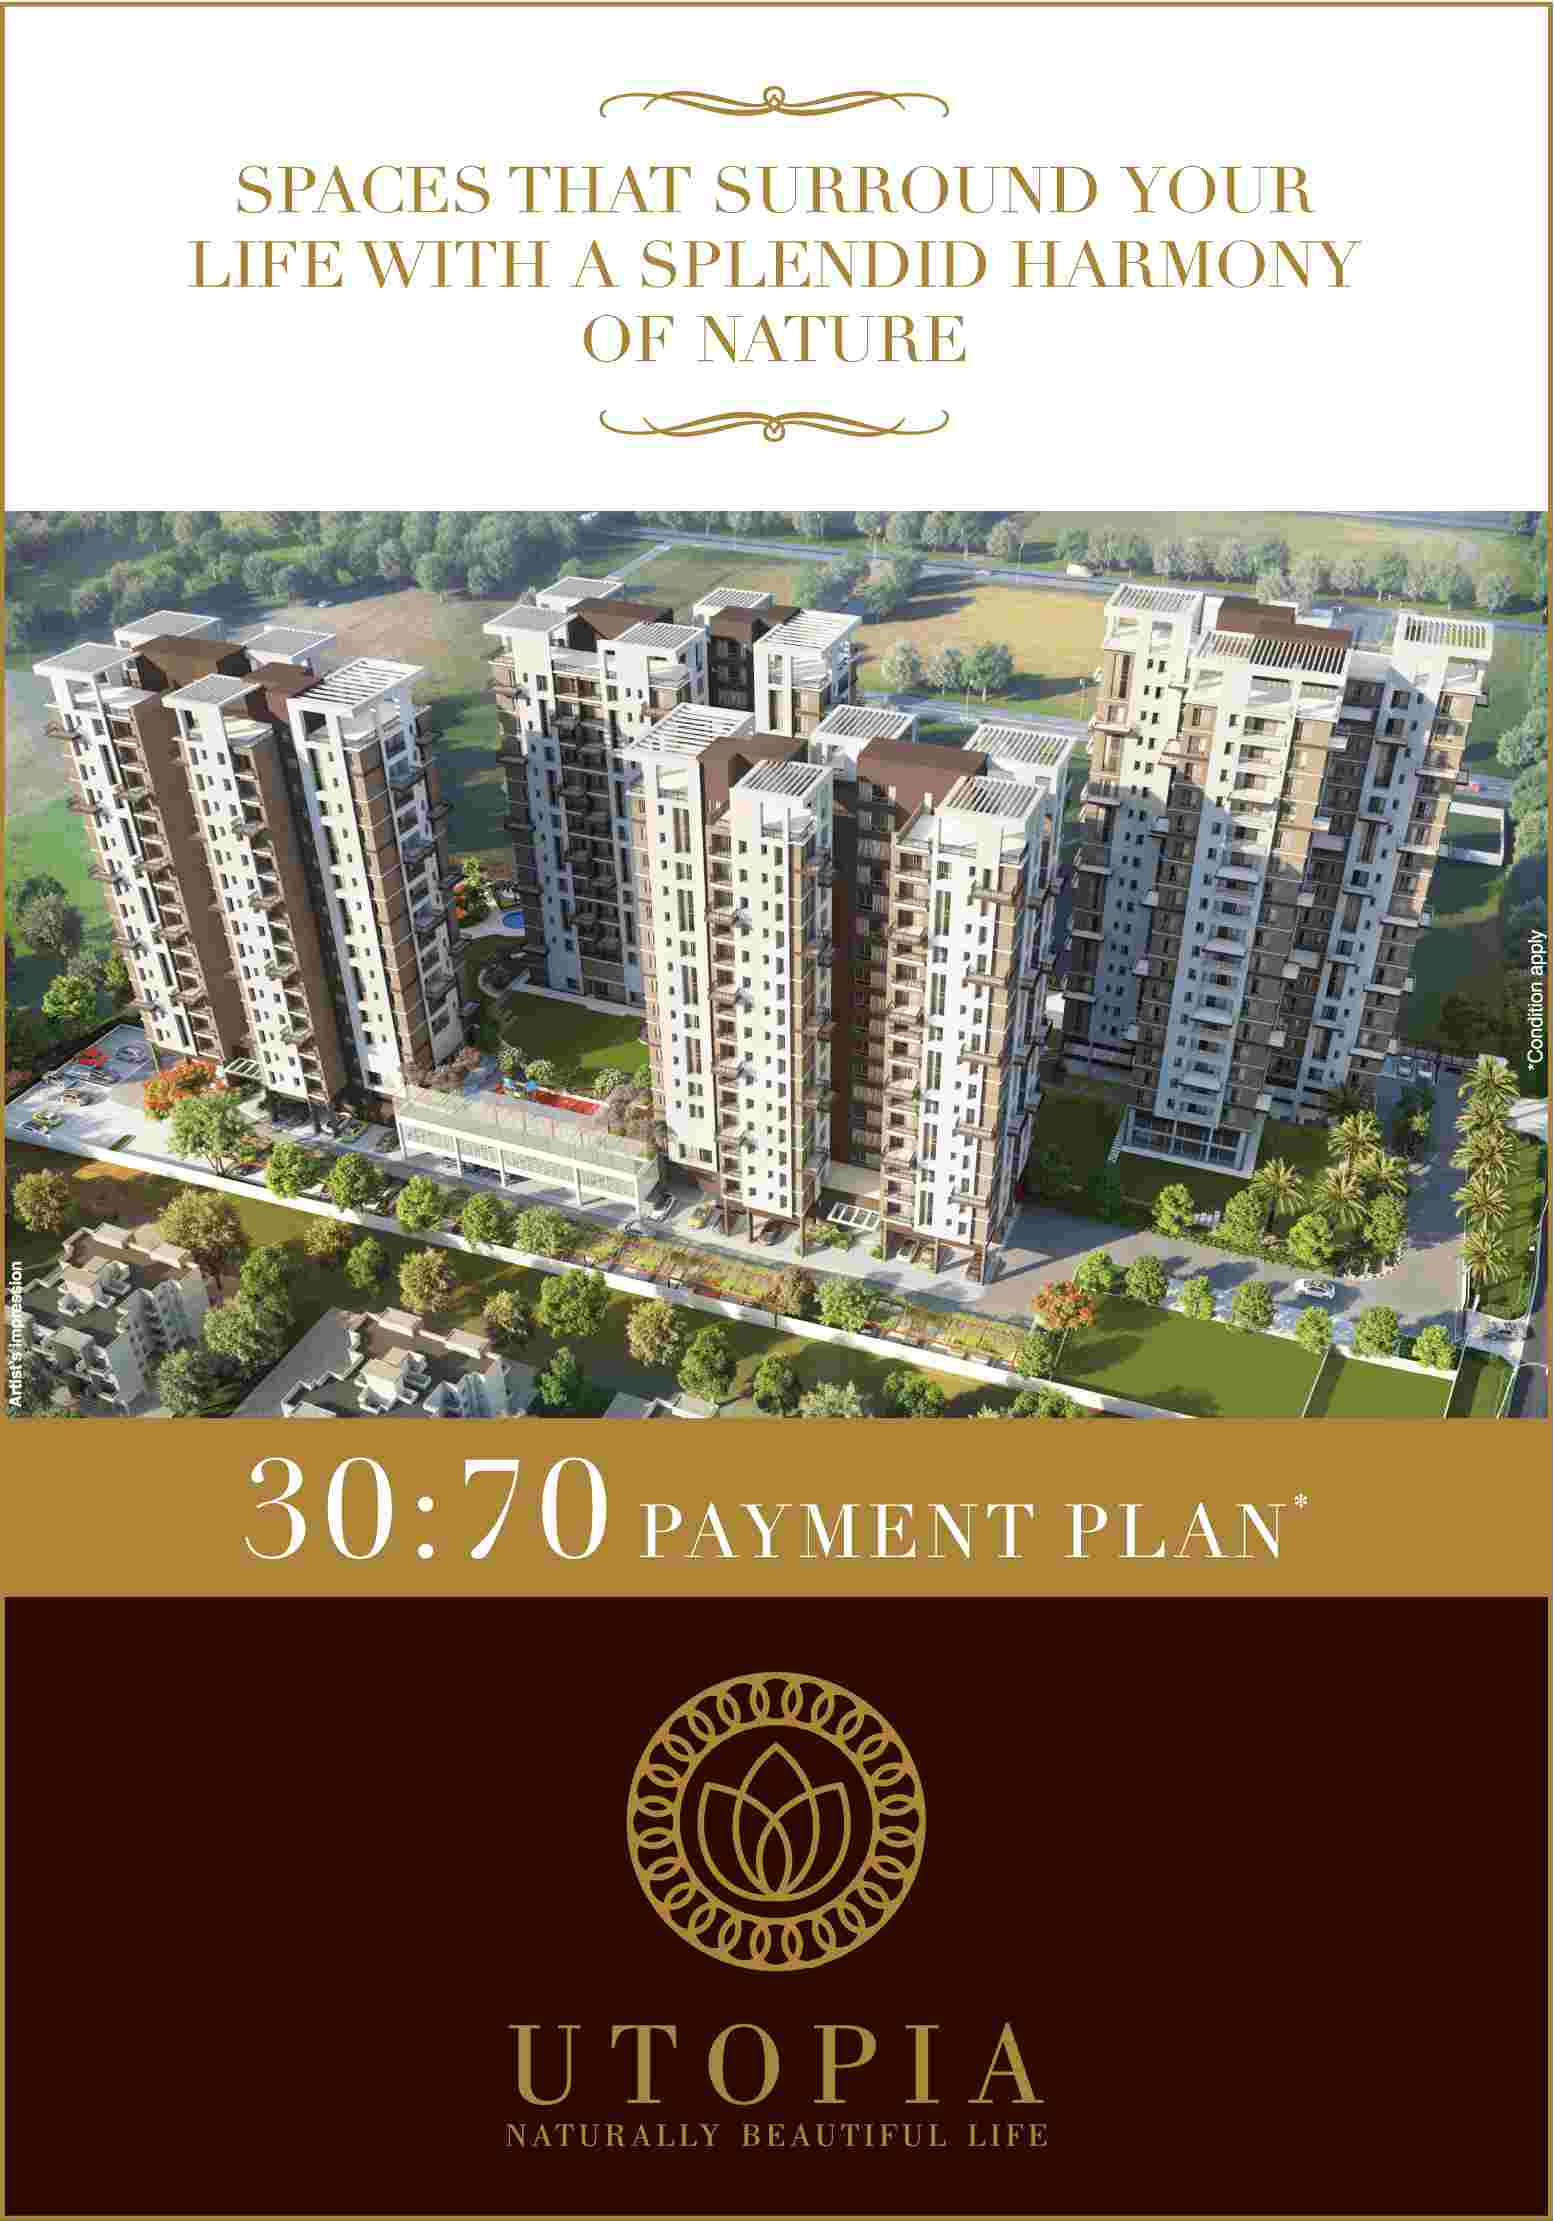 Book home with 30:70 payment plan at Shivom Utopia in Kolkata